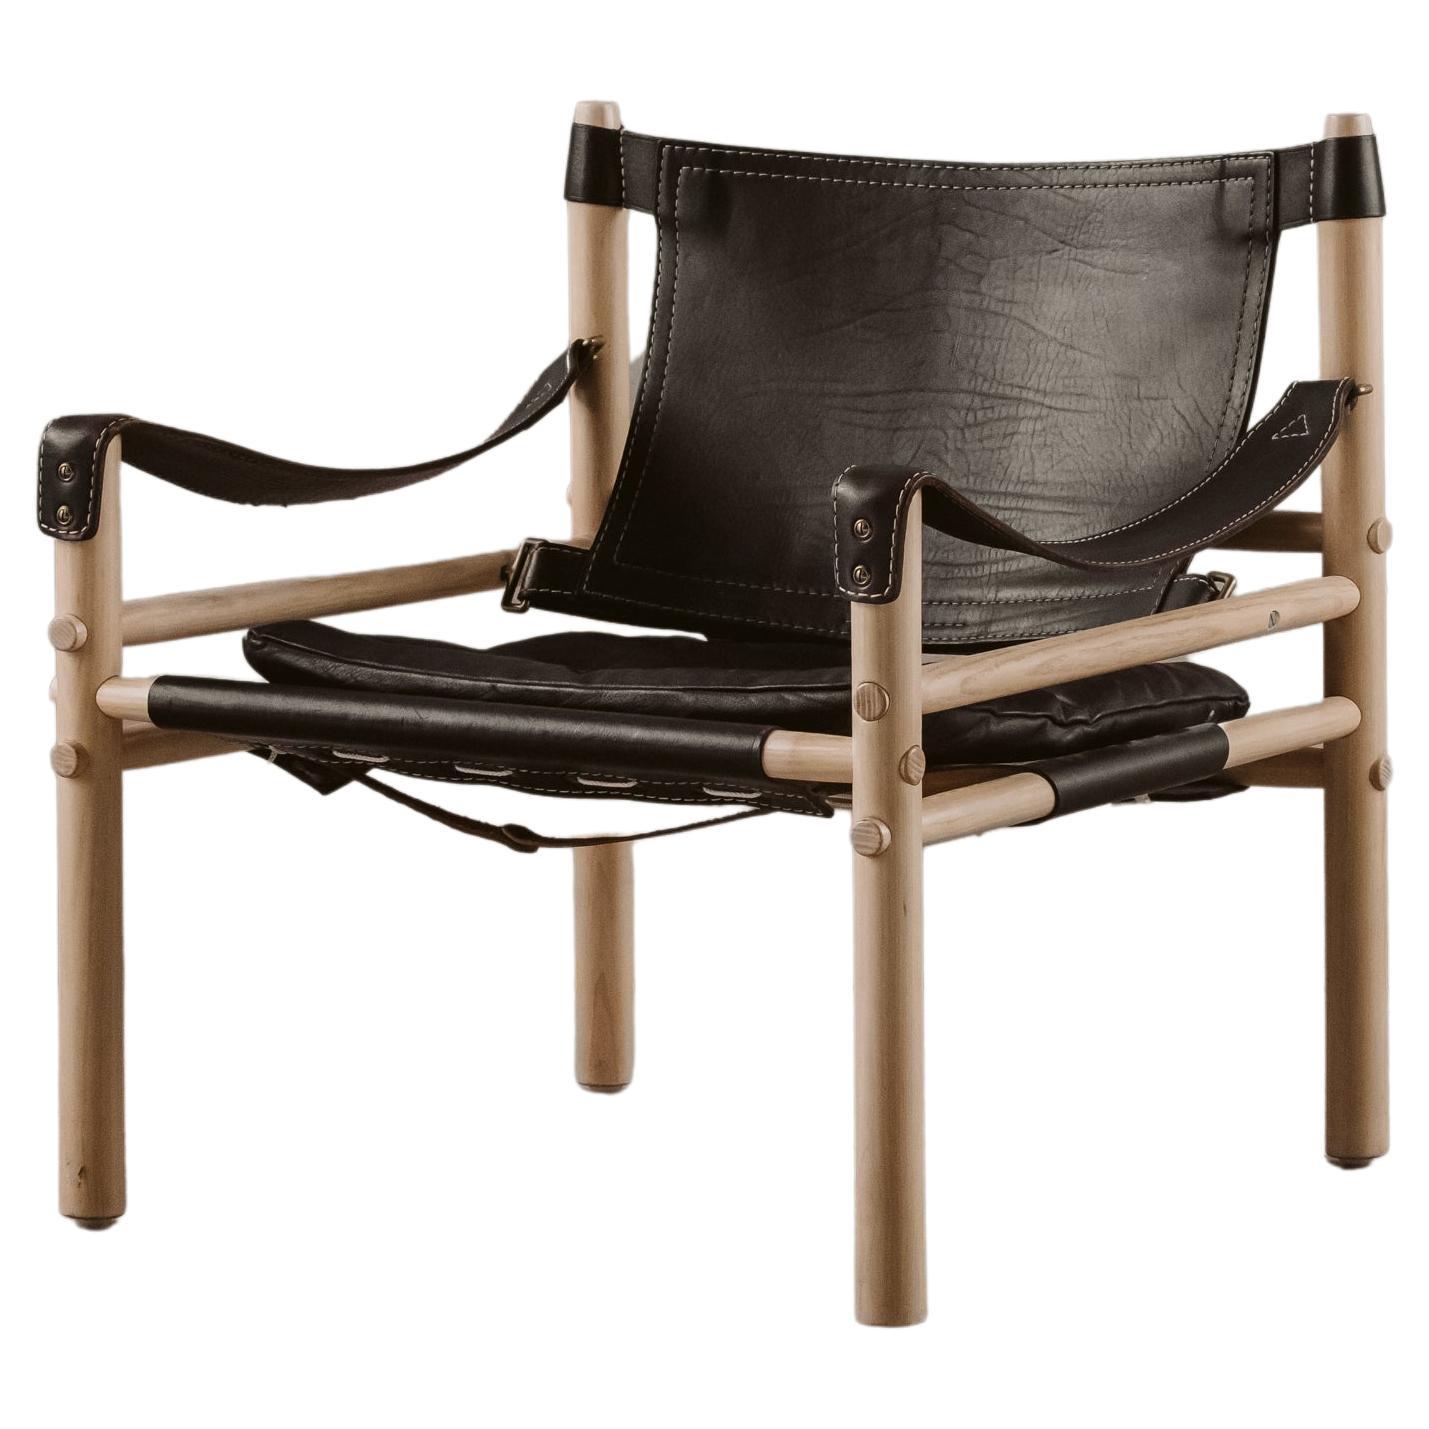 Vintage Arne Norell Lounge Chair, Model Sirocco, From Sweden, Circa 1970 For Sale